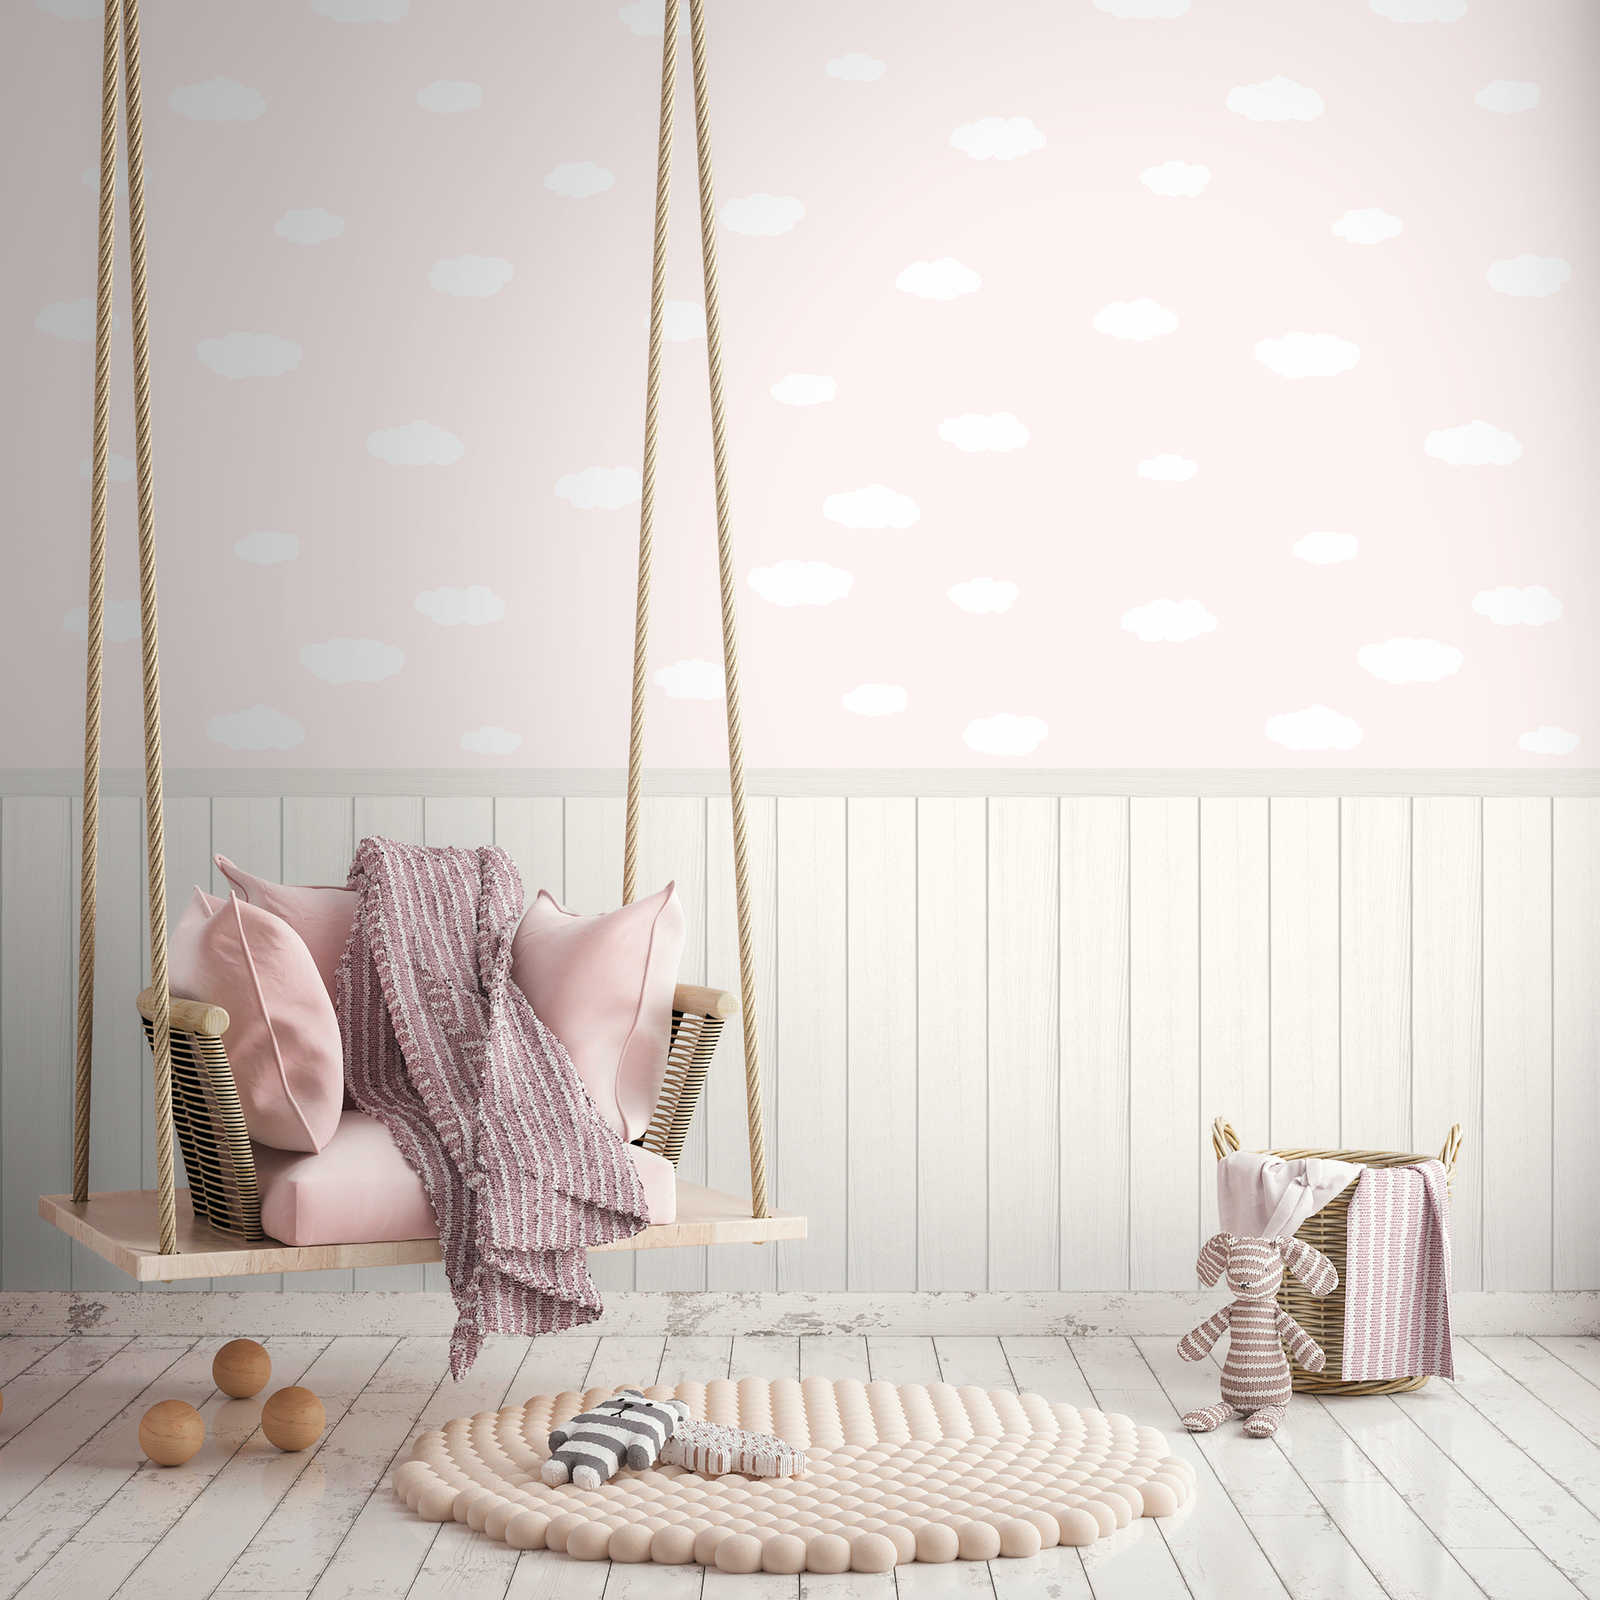 Non-woven motif wallpaper with wood-effect plinth border and cloud pattern - pink, white, grey
